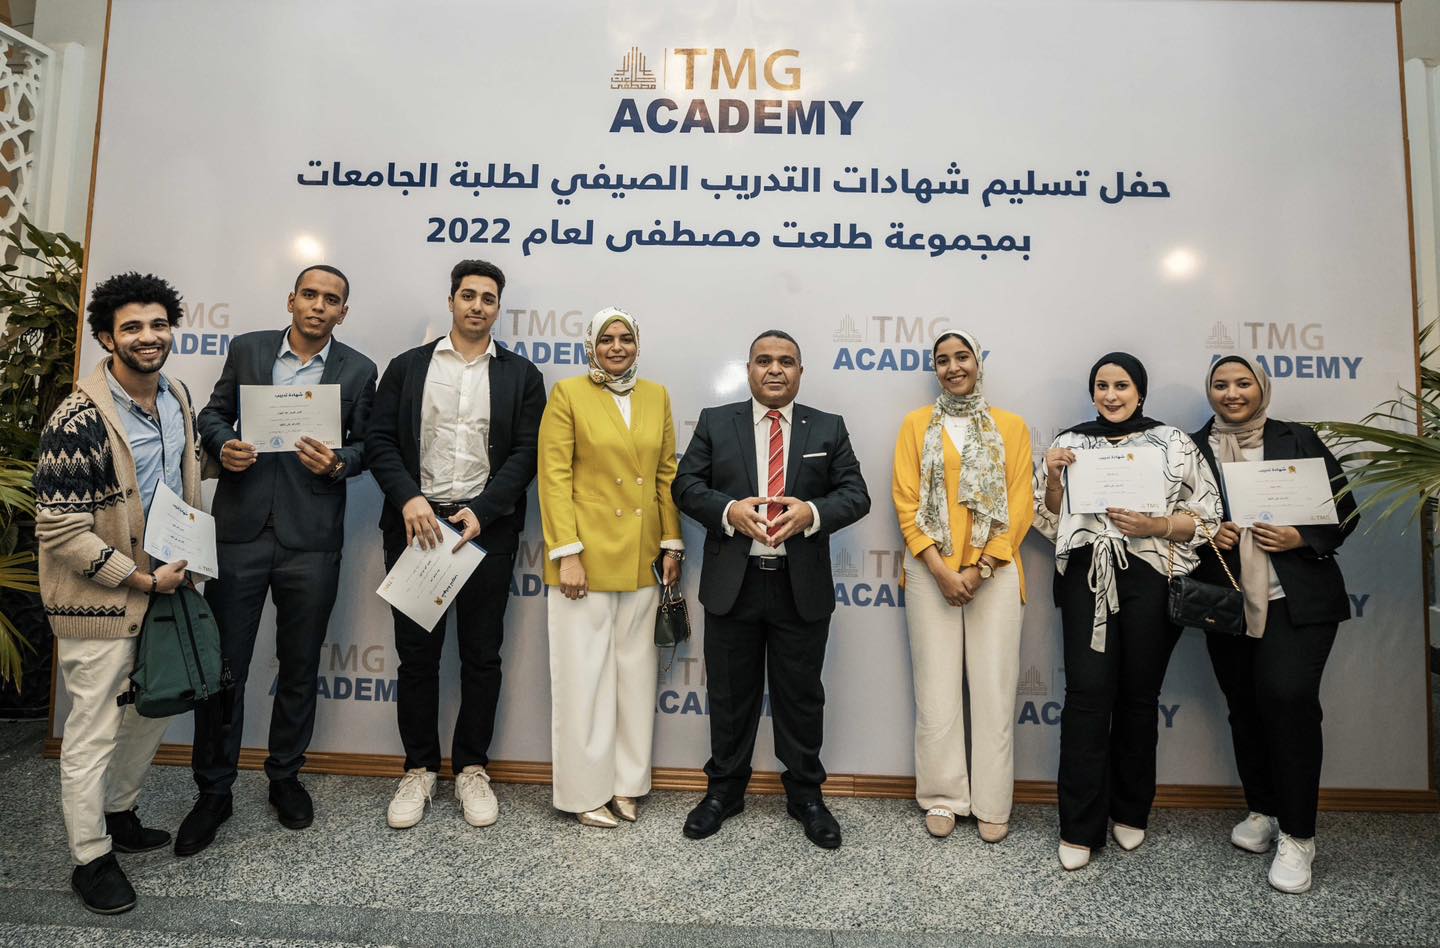 Our Engineering Students Honored by Talaat Mostafa Group